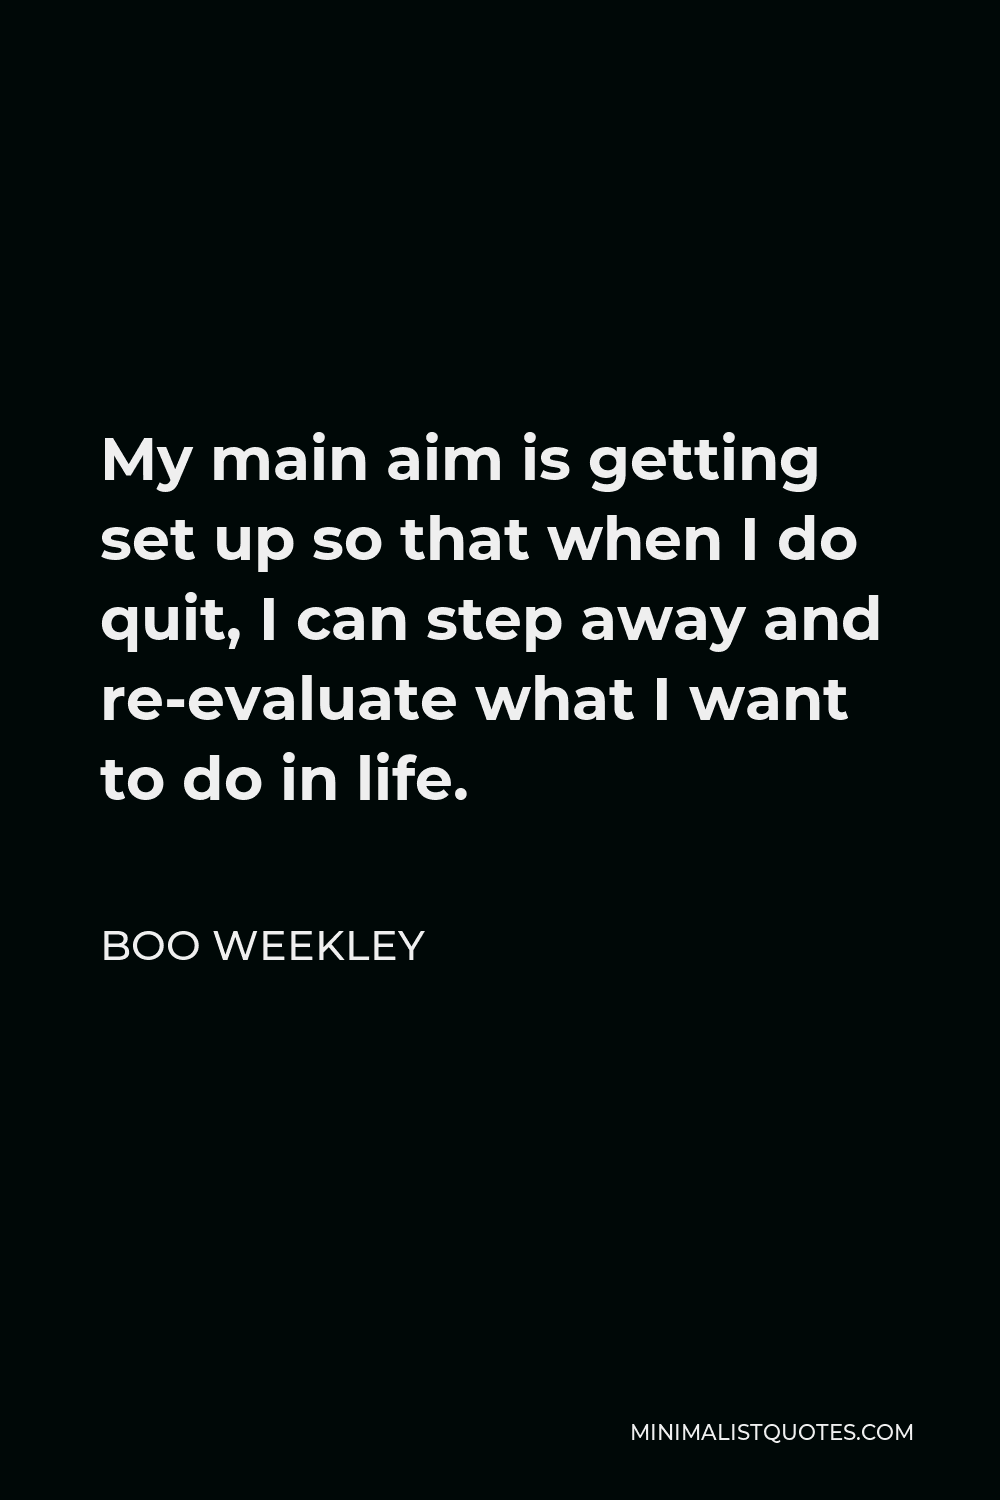 Boo Weekley Quote - My main aim is getting set up so that when I do quit, I can step away and re-evaluate what I want to do in life.